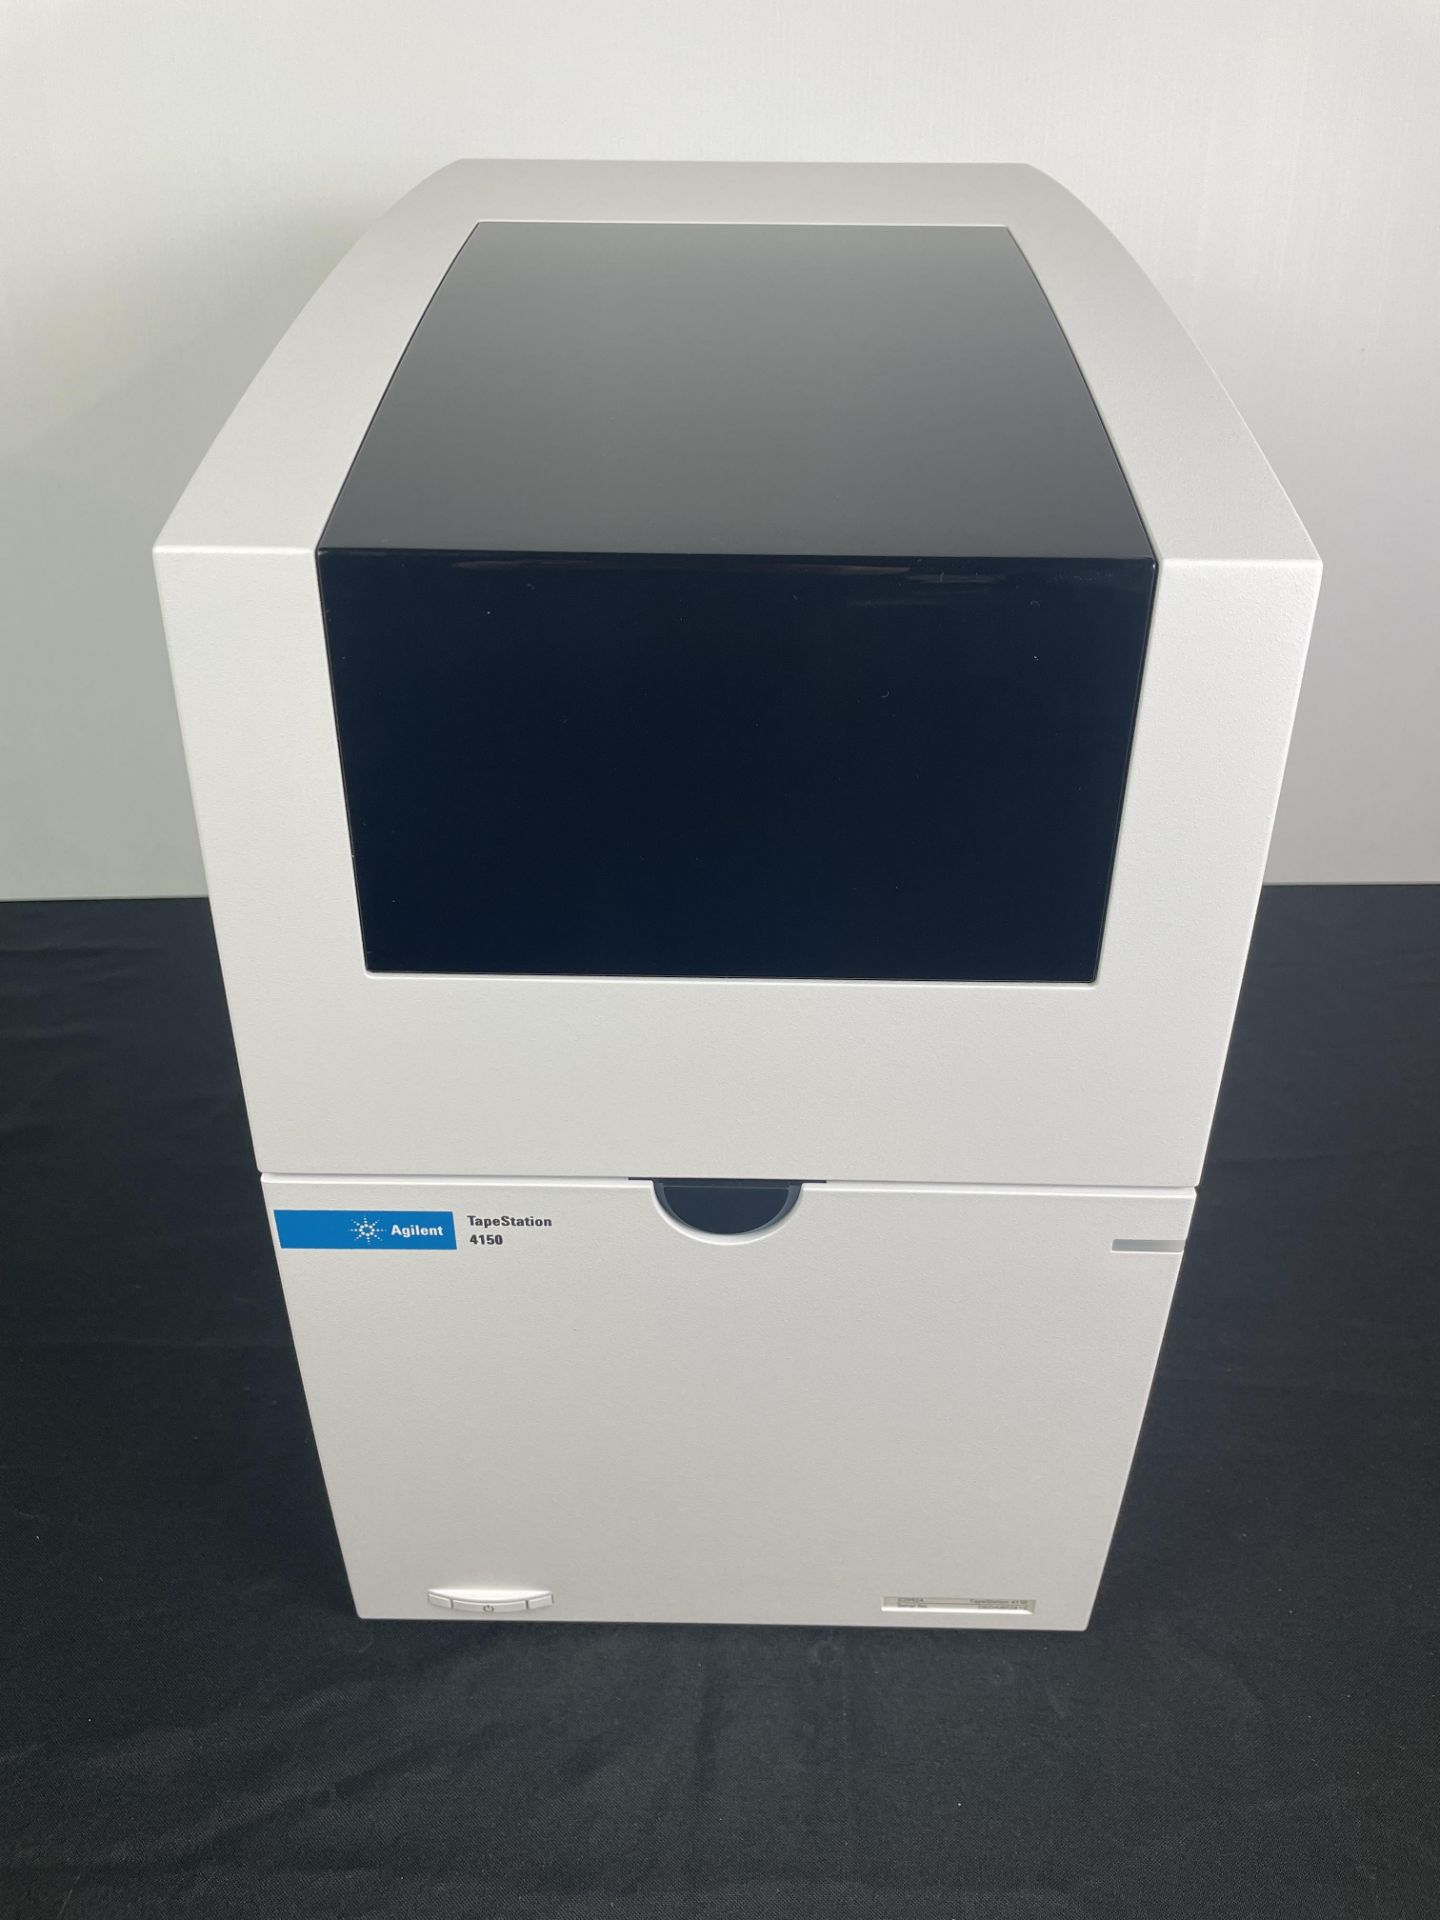 2022 Agilent #4150 Tape Station PN:G2992A and SN:DEDAB02810 (USED UNDER 10X)